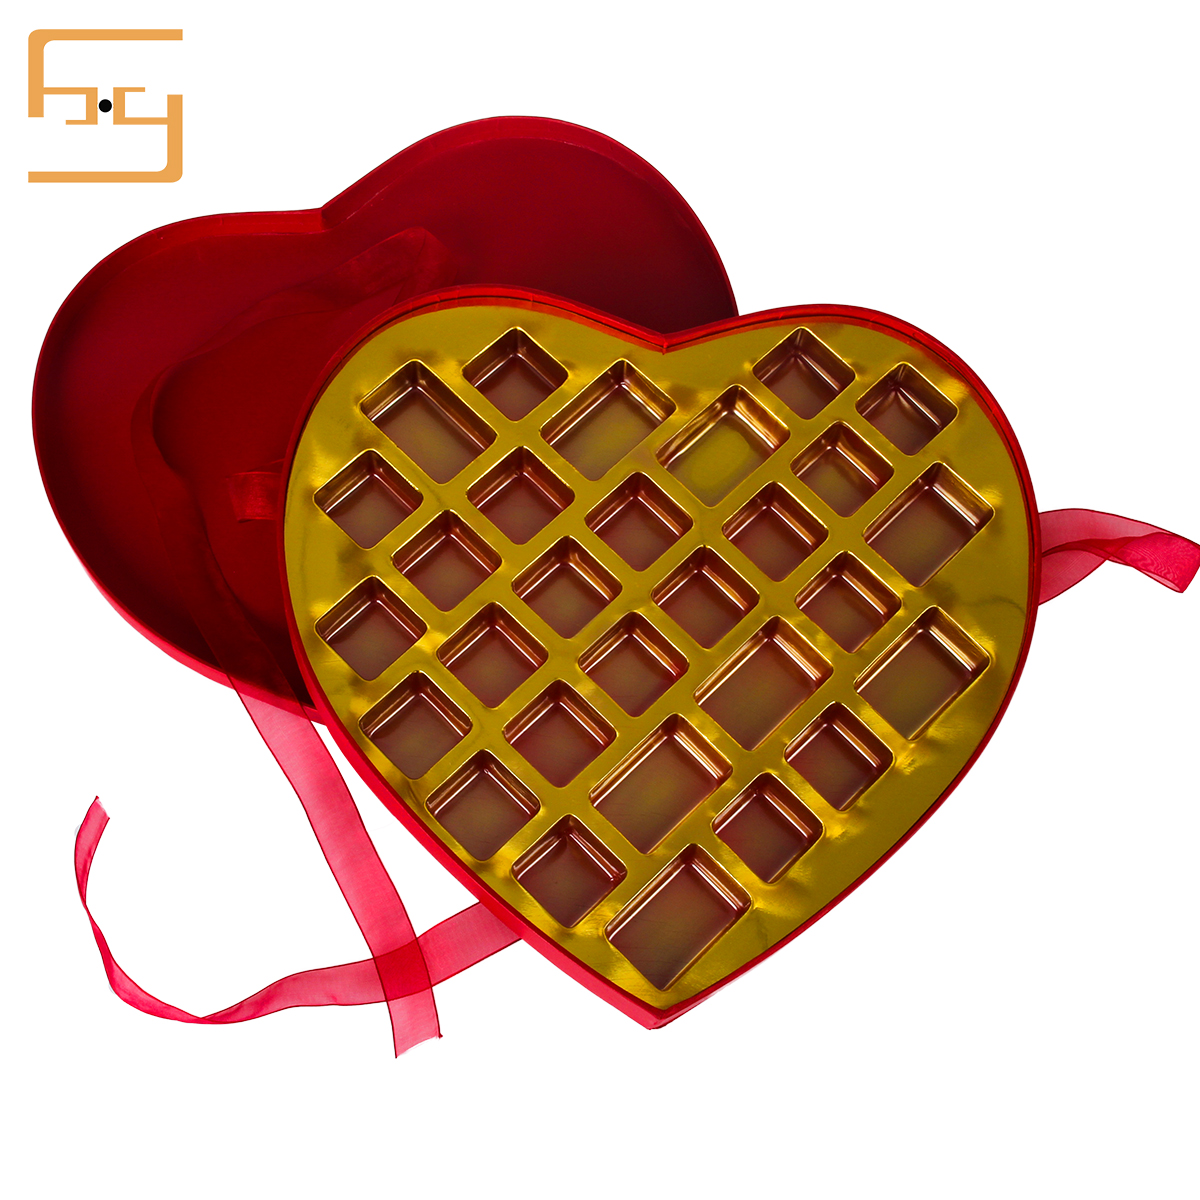  High Quality Heart-shape Chocolate Golden Tray 3